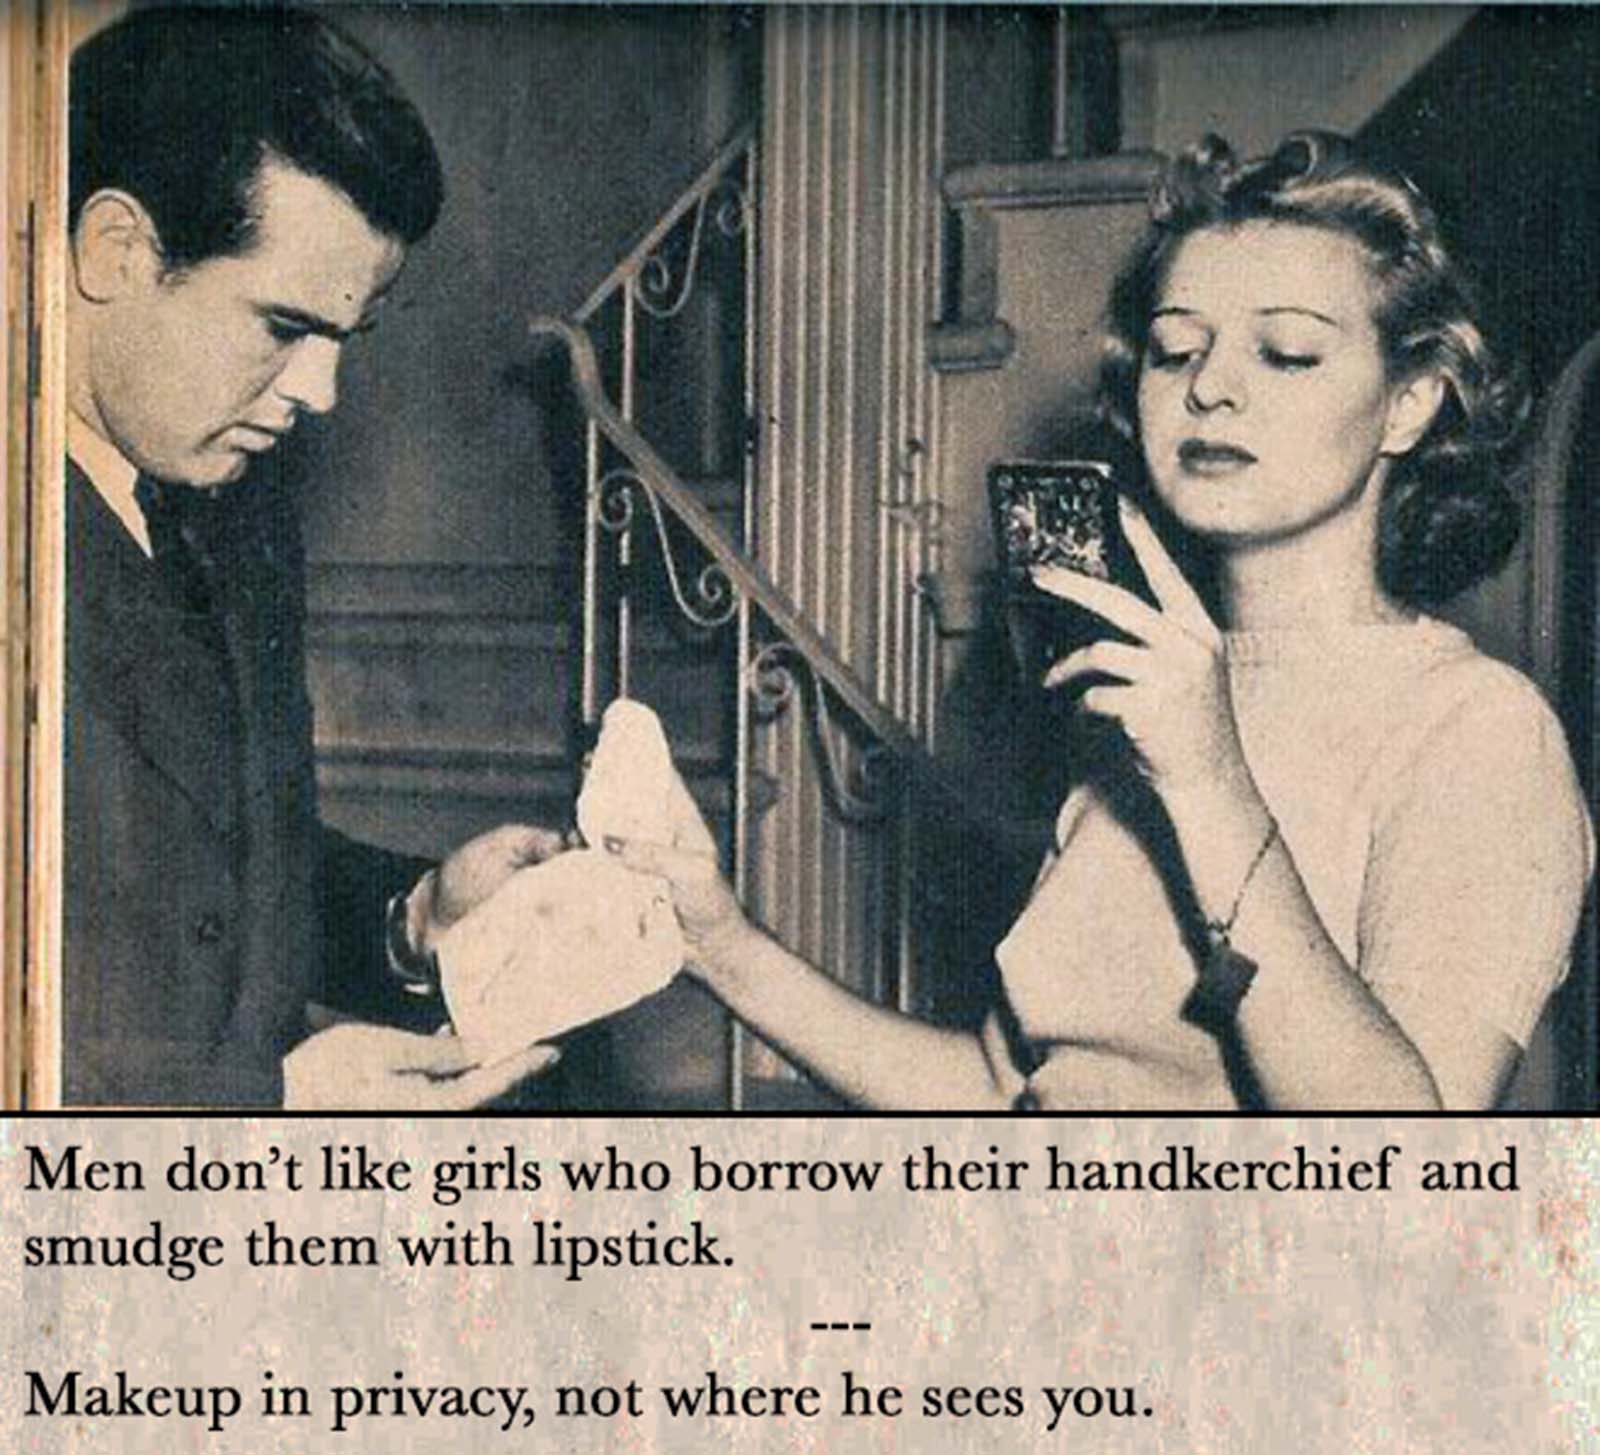 Men don't like girls who borrow their handkerchief and smudge them with lipstick.